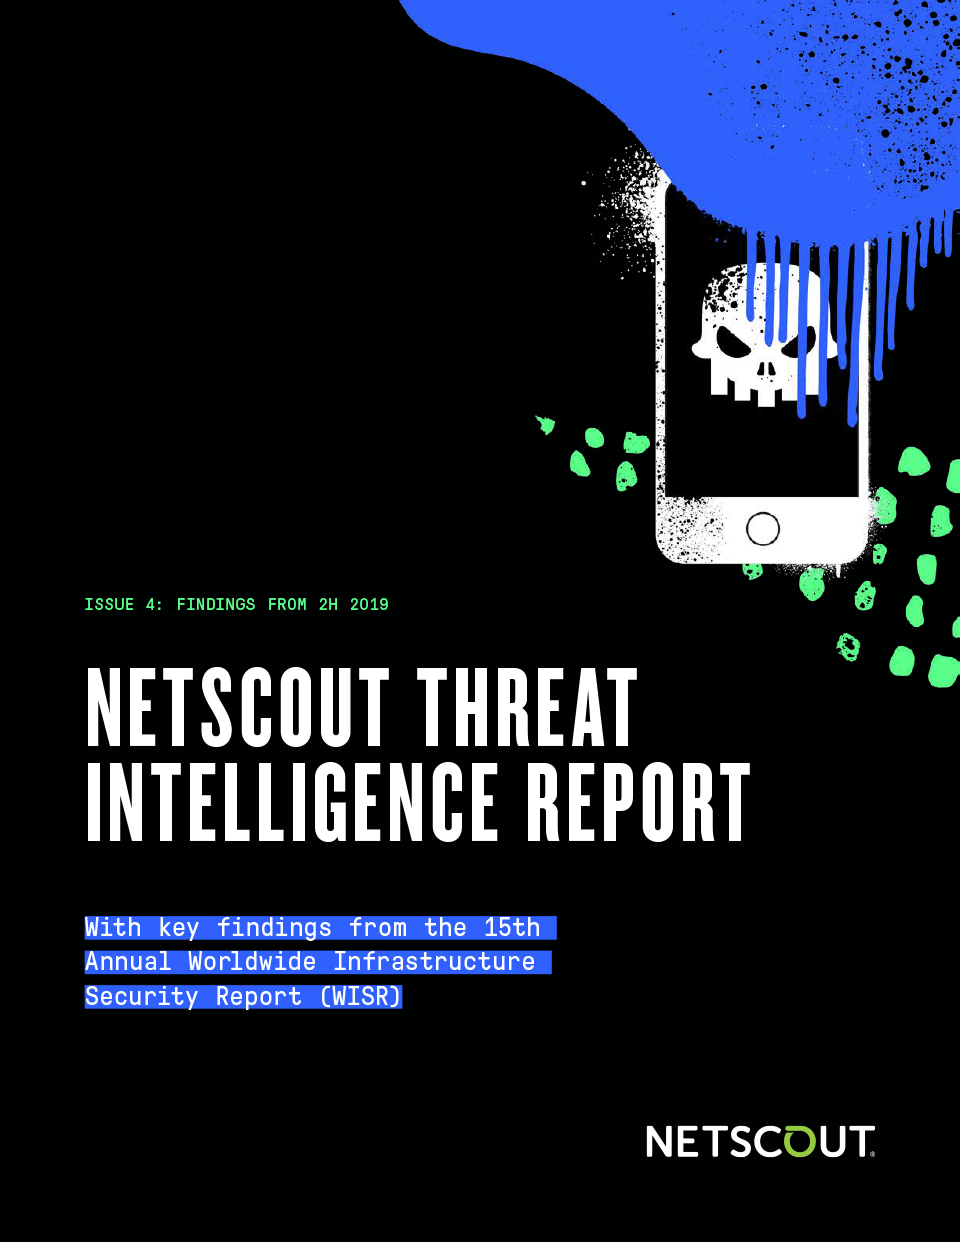 NETSCOUT Threat Report 2H 2019